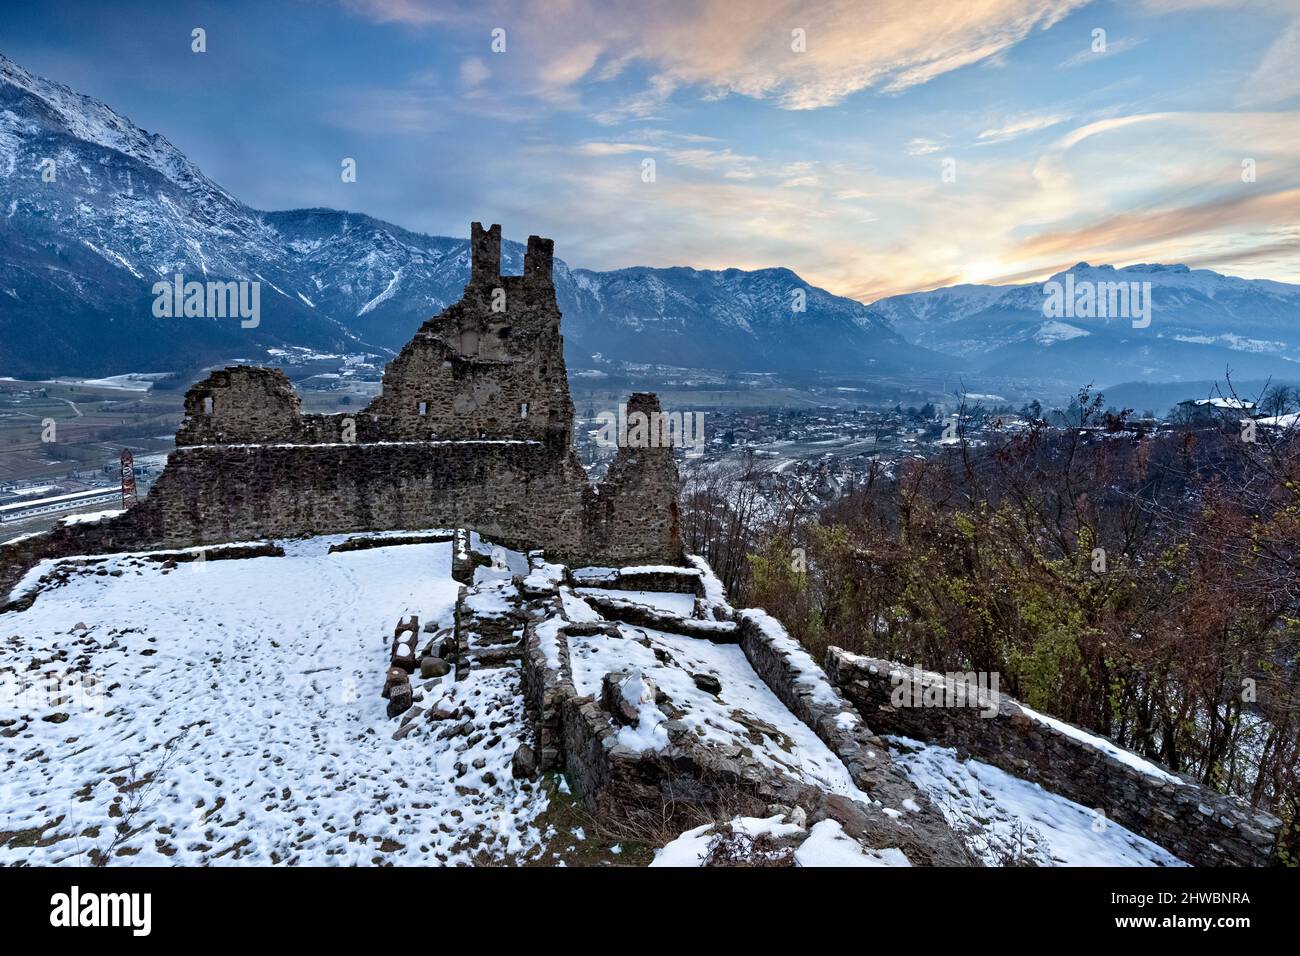 The crenellated ruins of Selva Castle and the Valsugana plain. In the background Cima Vezzena. Levico Terme, Trentino, Italy. Stock Photo